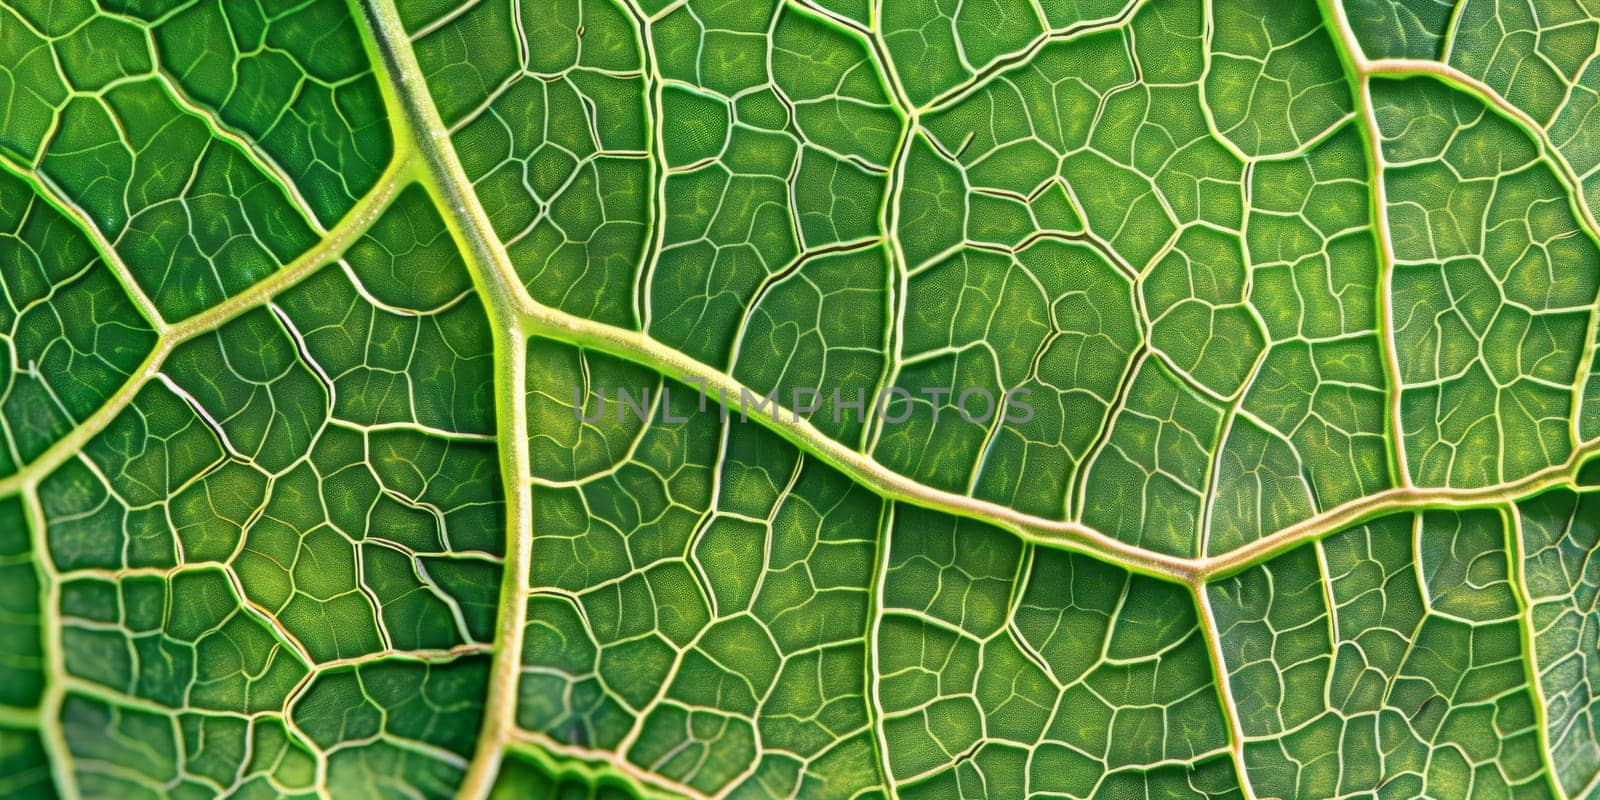 Complex network of veins in leaf, tracing their paths and connections